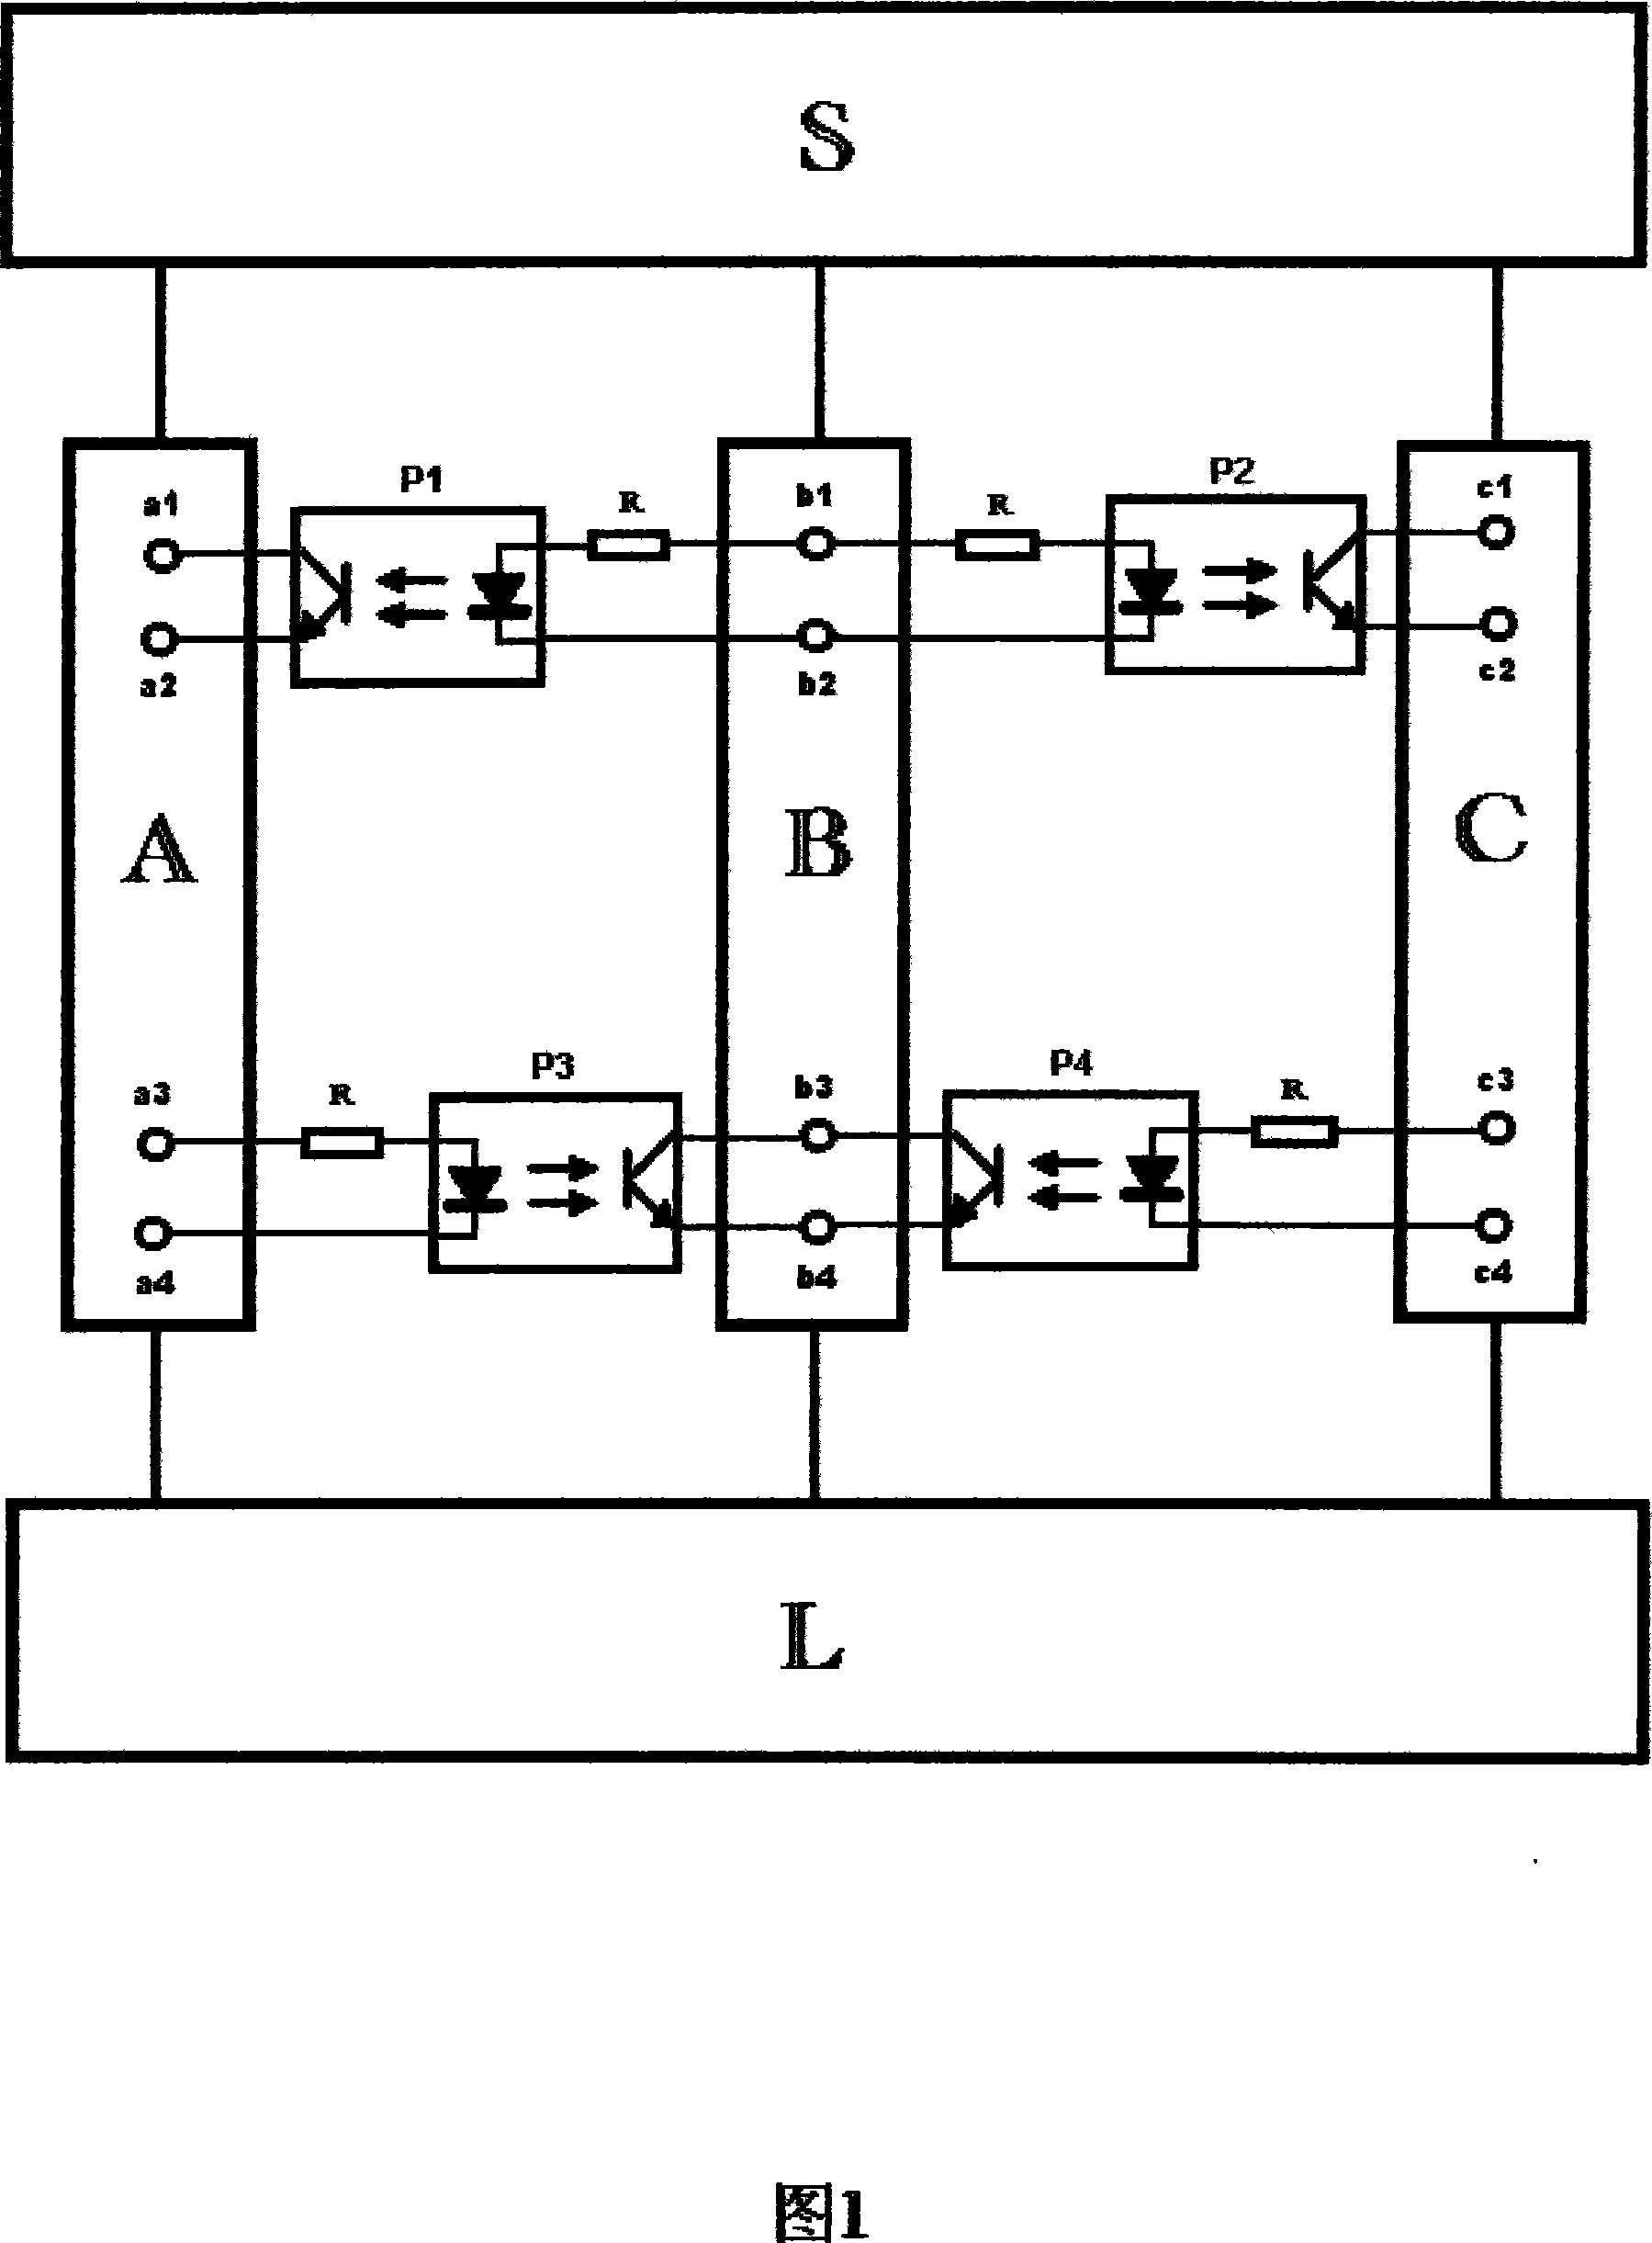 Linkage device for AC two-wire type solid state switch